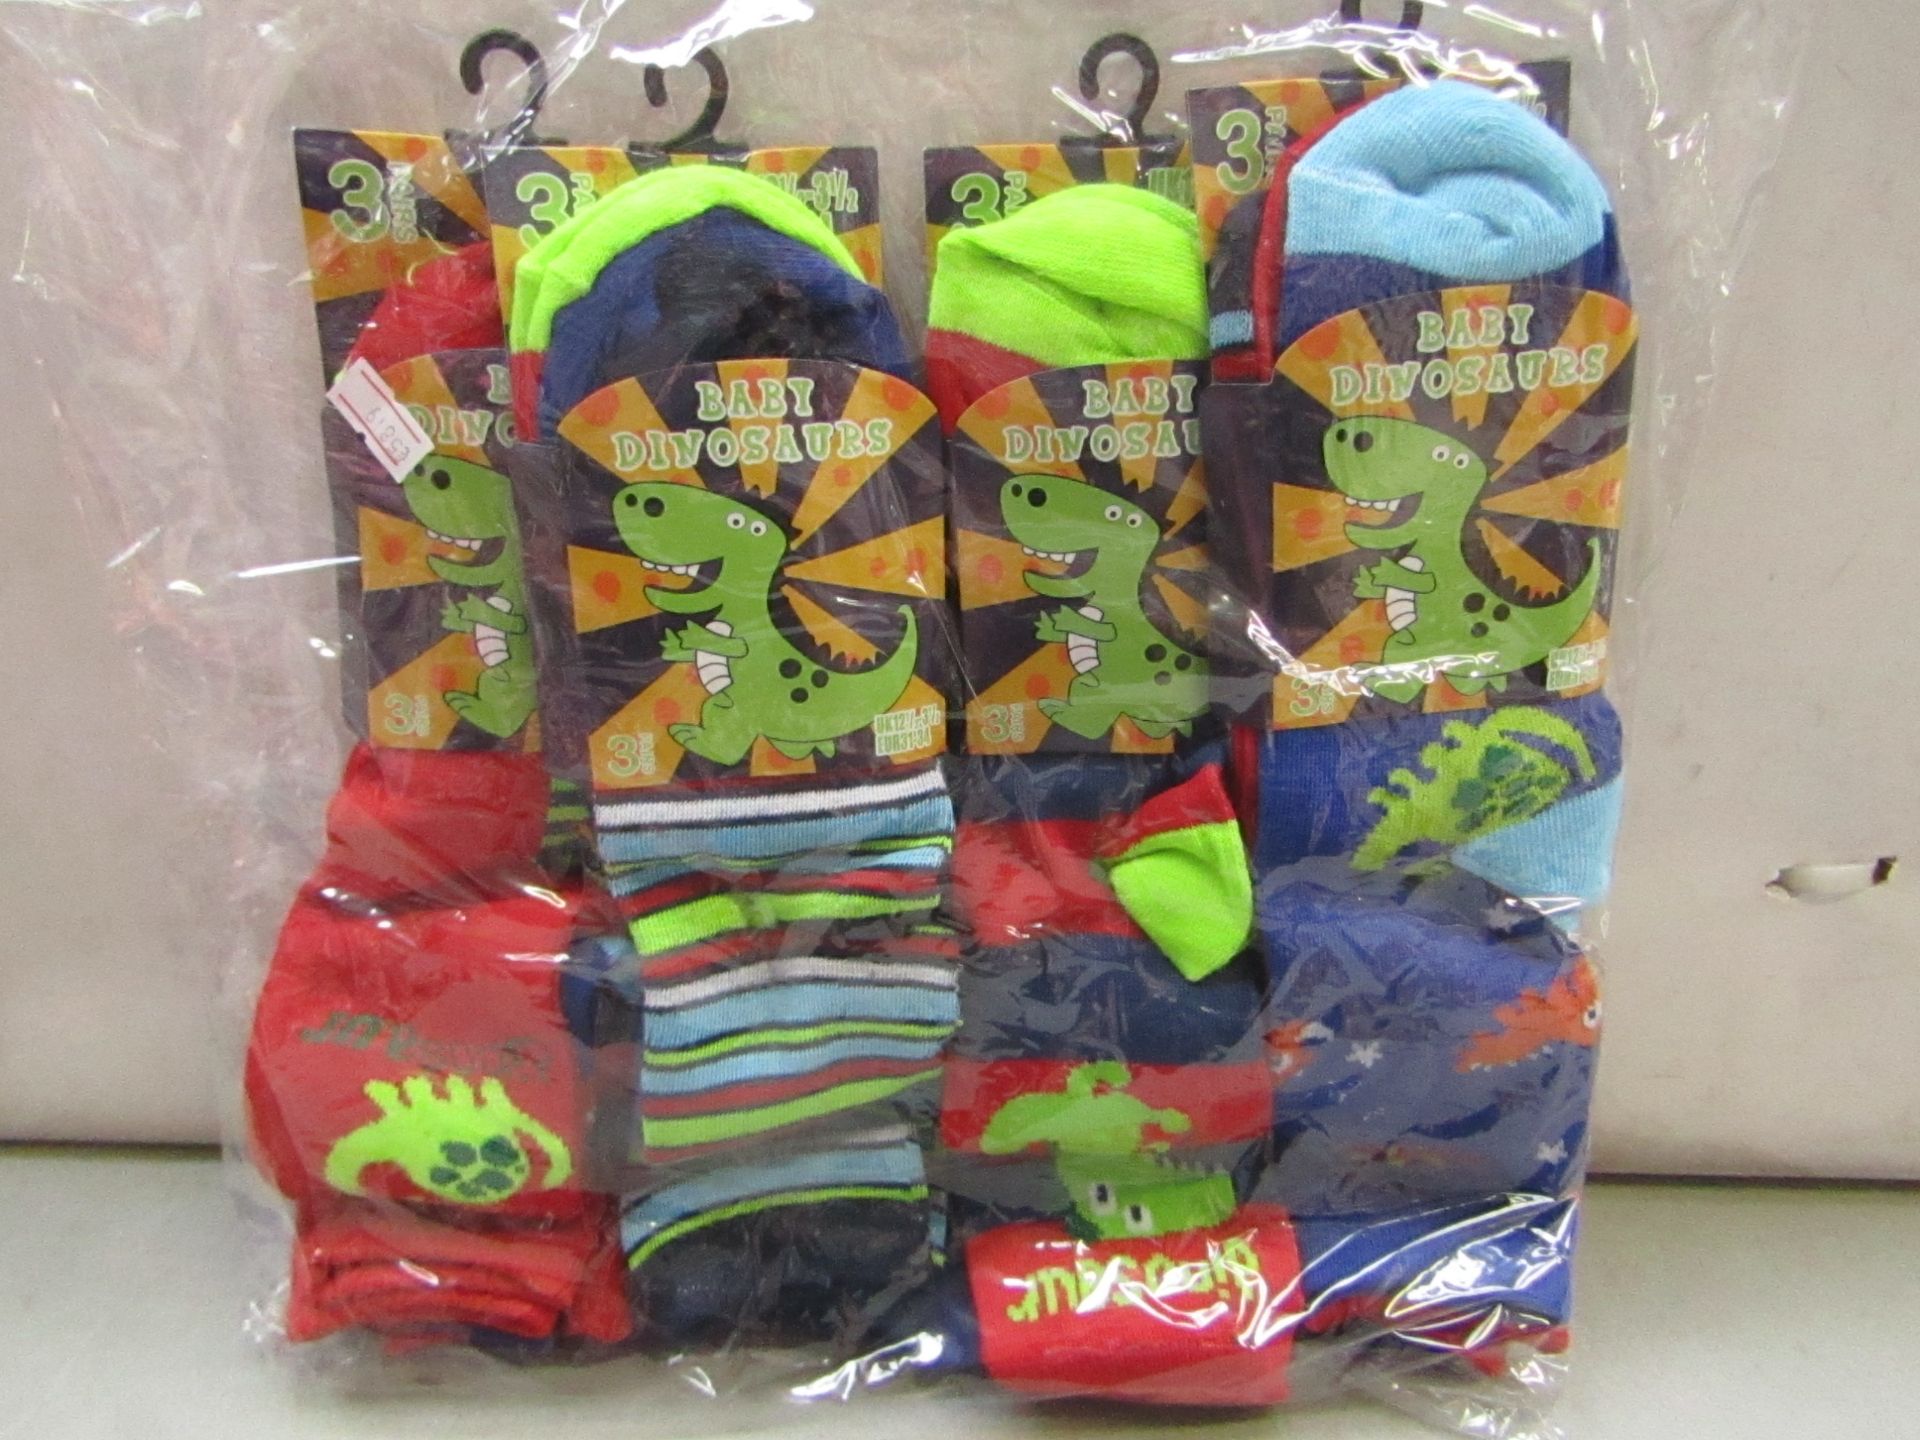 Pack of 12 Childrens Baby Dinosaur Themed socks size 12 1/2 to 3 1/2 all new in packaging